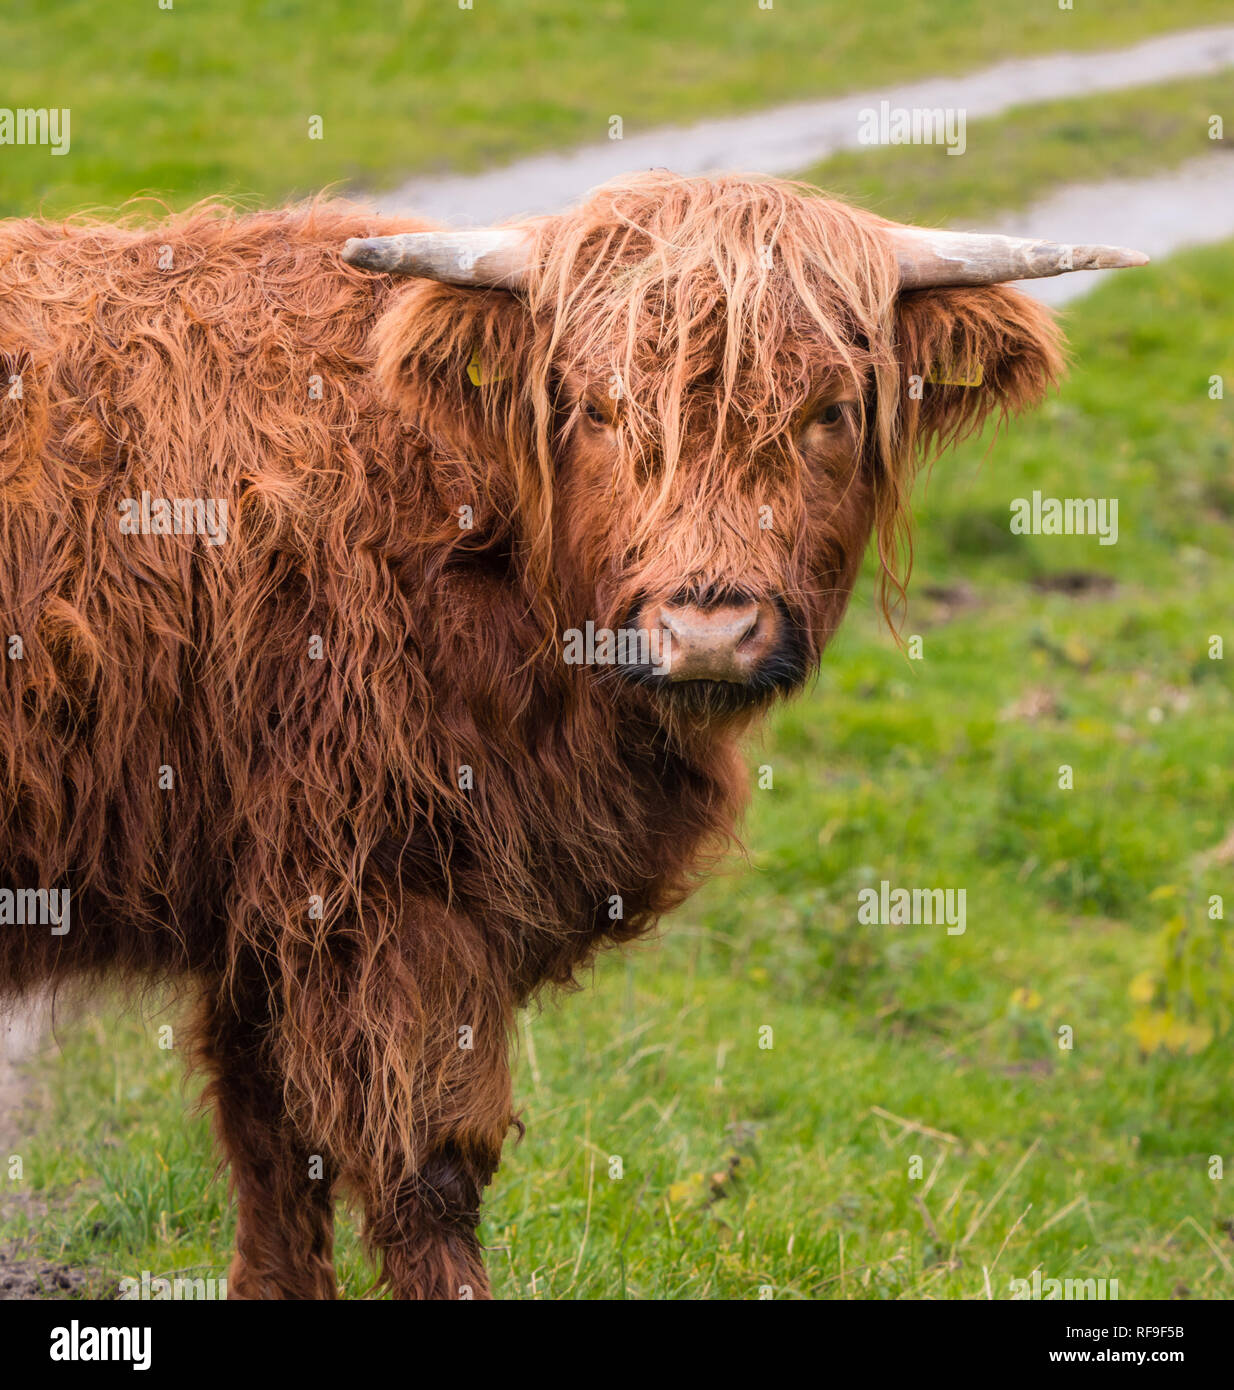 Highland cow in Scottisch landscape stares at camera Stock Photo